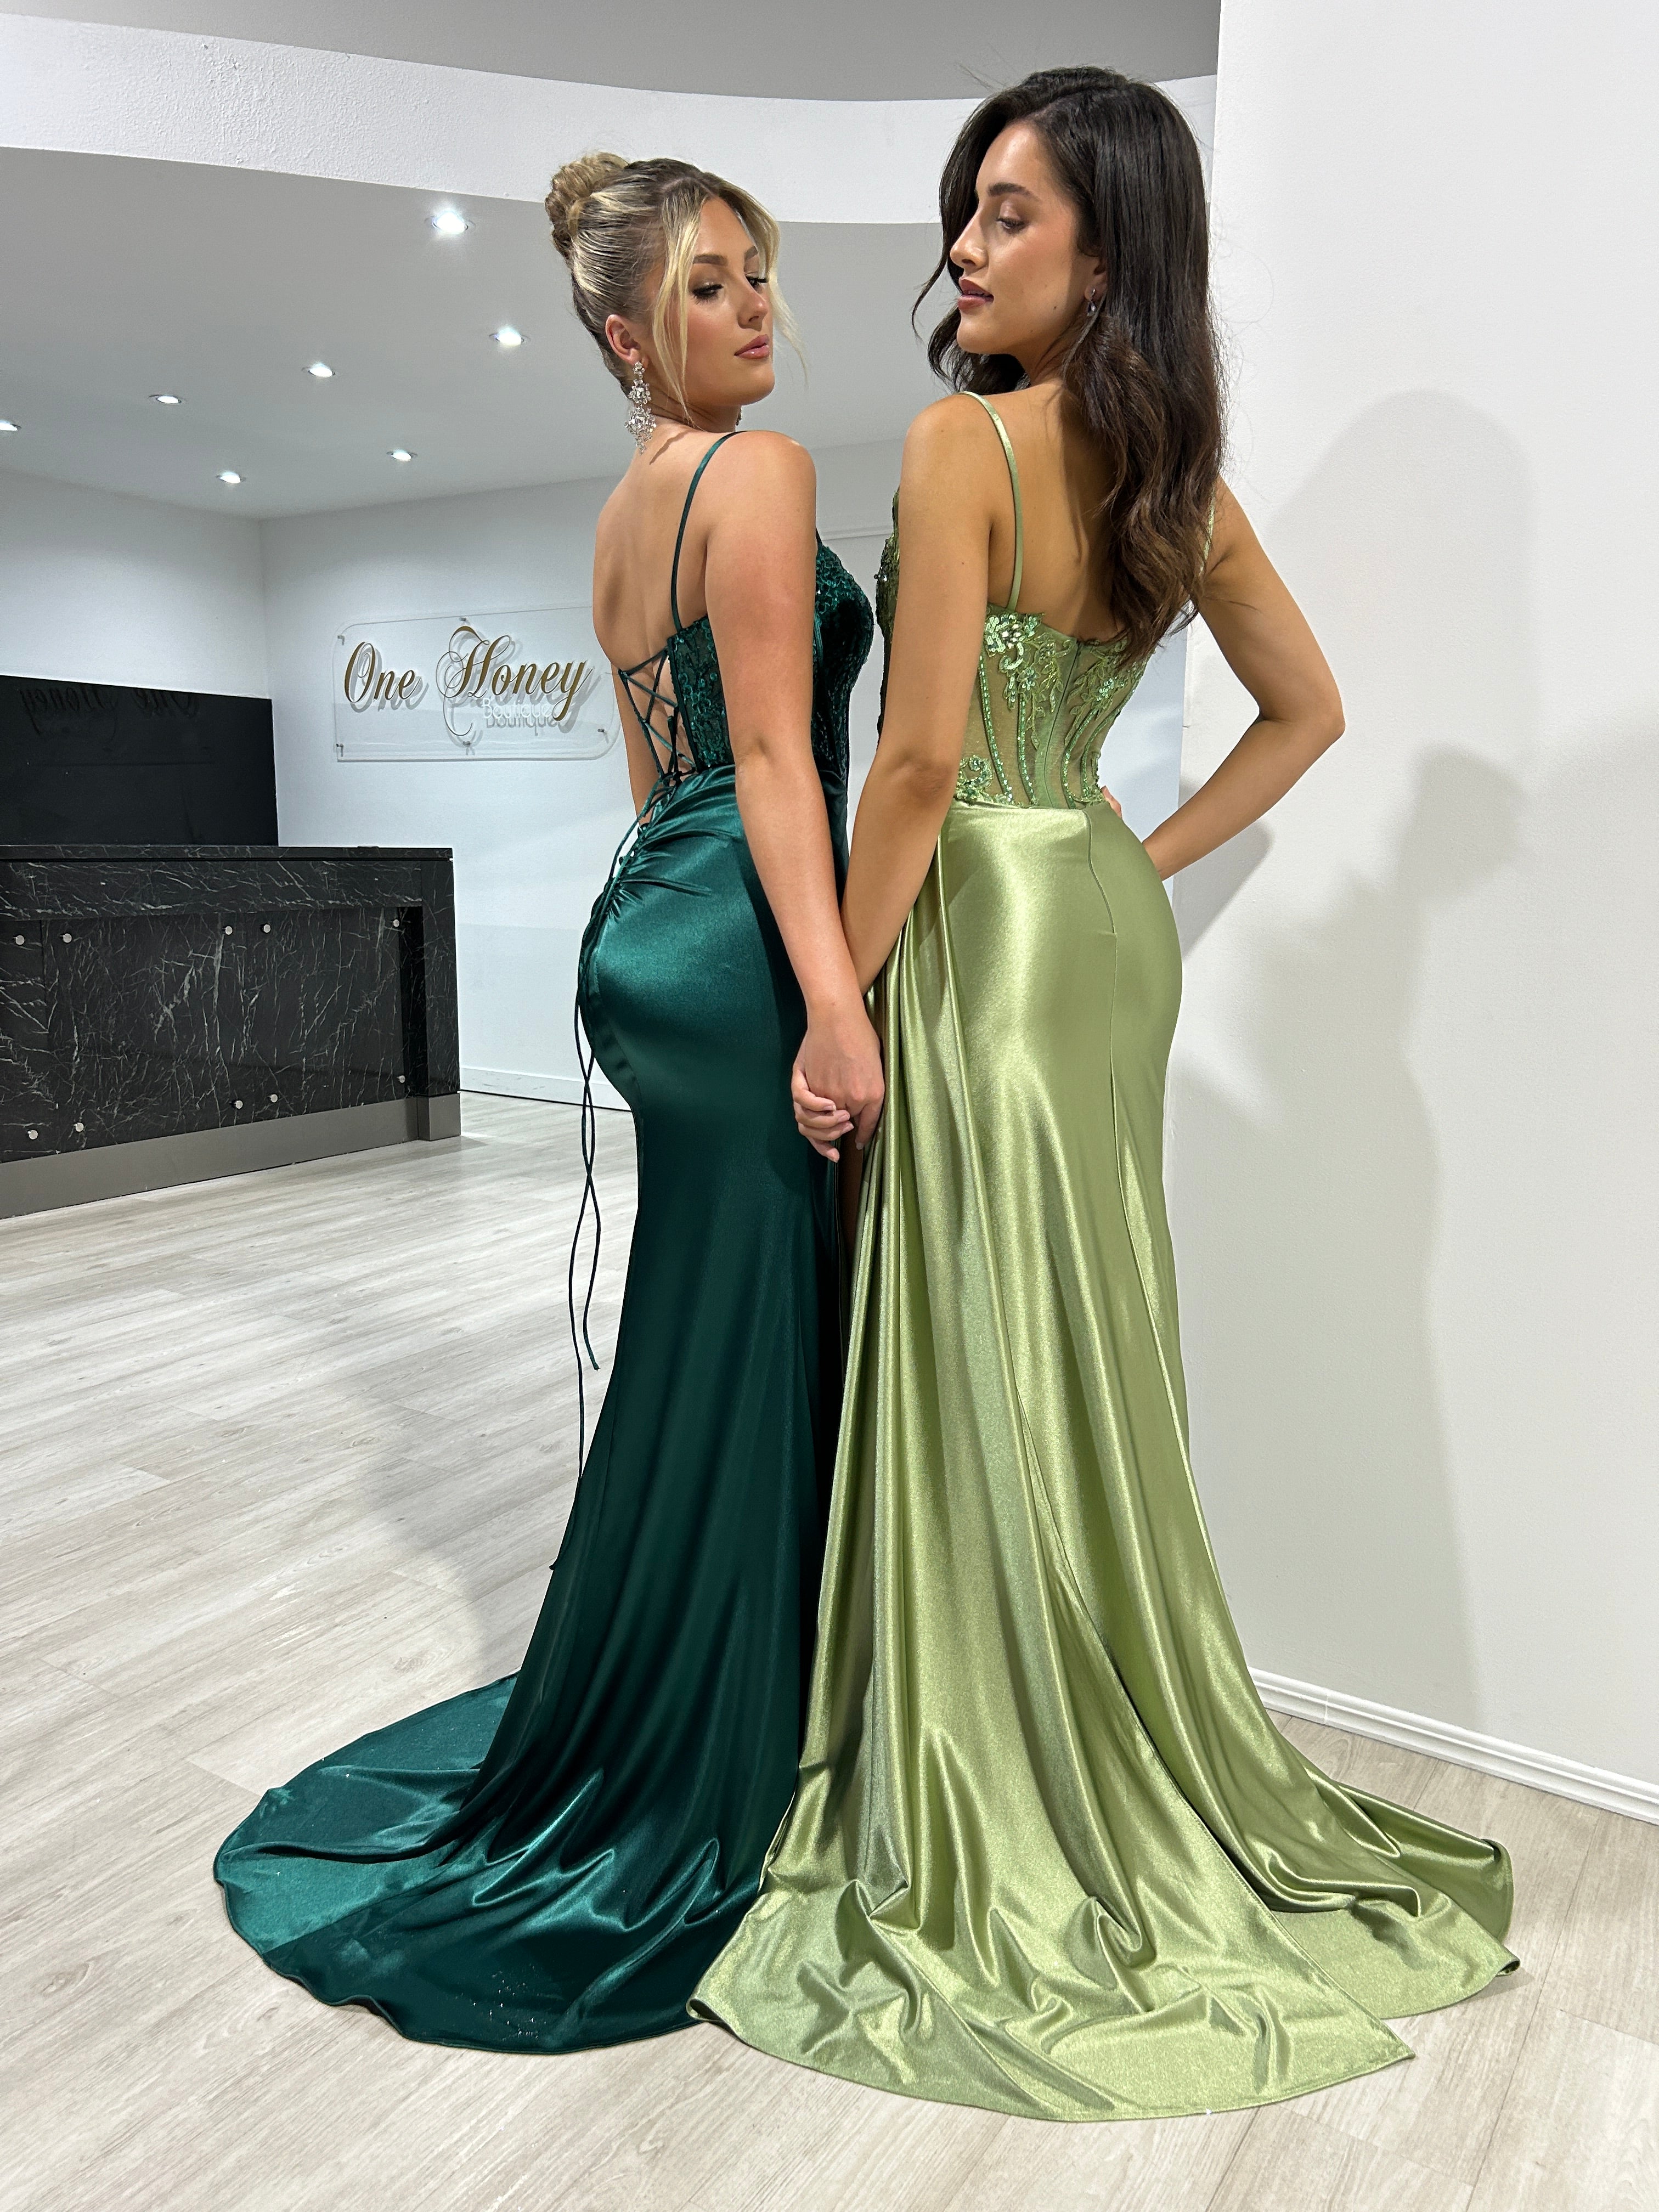 Honey Couture STERLING Greenery Embellished Corset Satin Mermaid Formal Dress